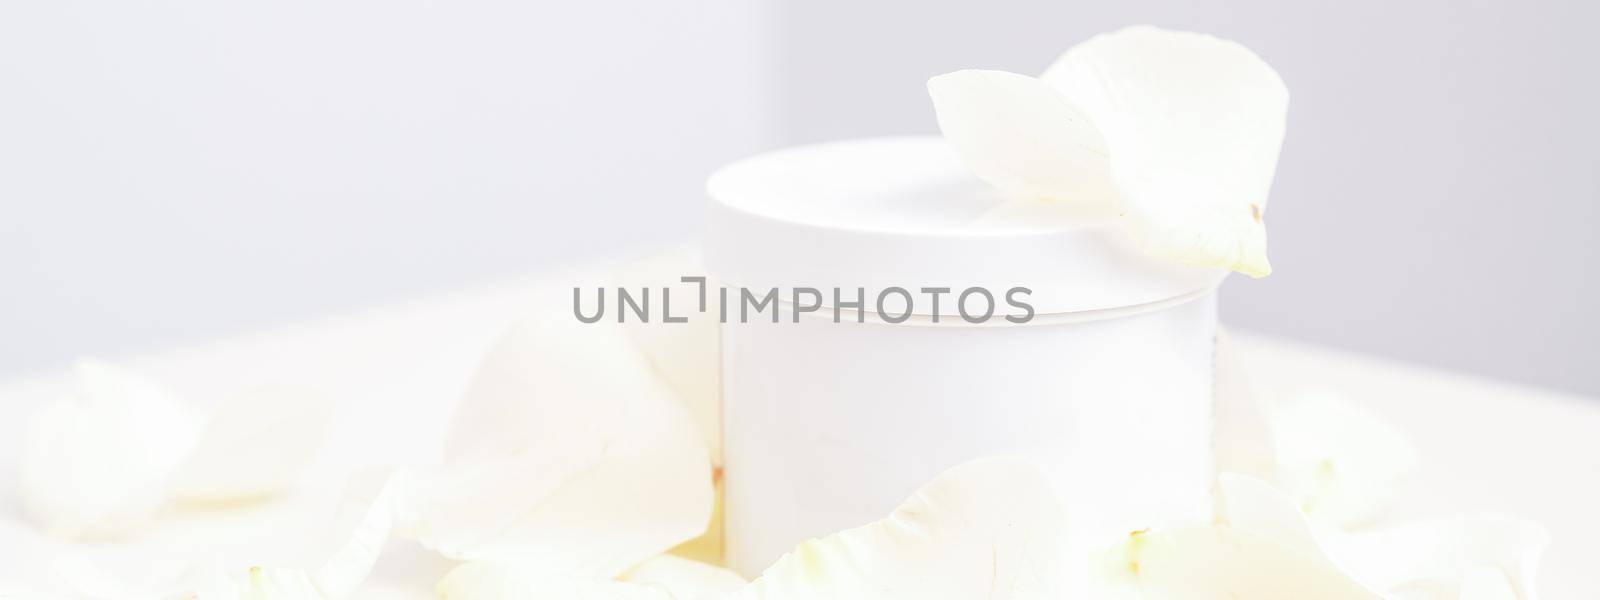 White jar with cream among delicate white rose flowers petals on a light background. Natural organic cosmetics concept, close up, mock-up